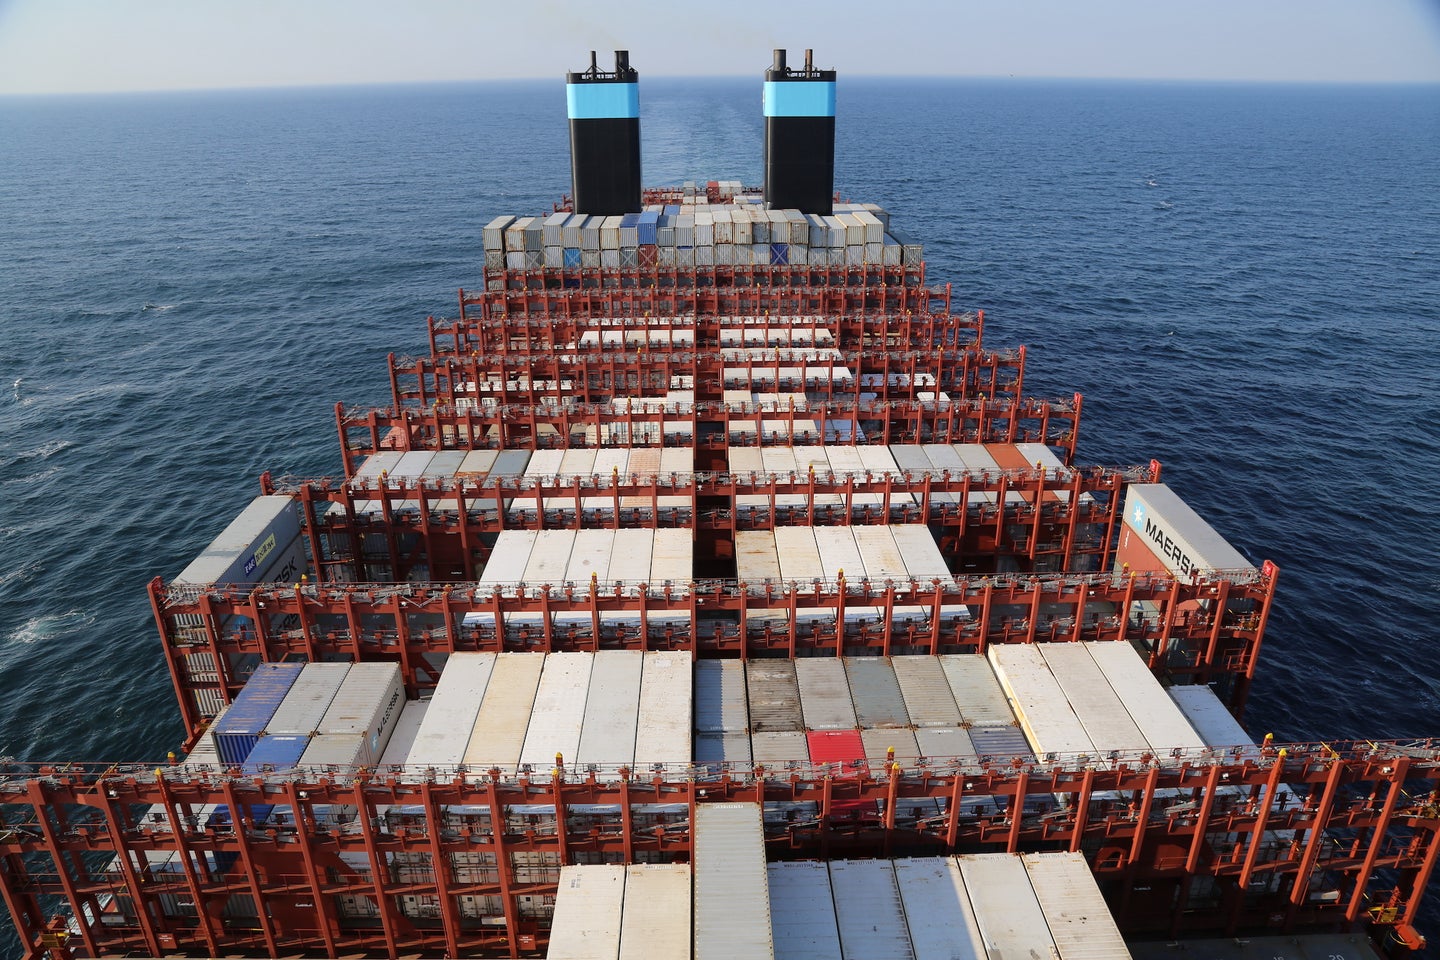 the view from on a container ship